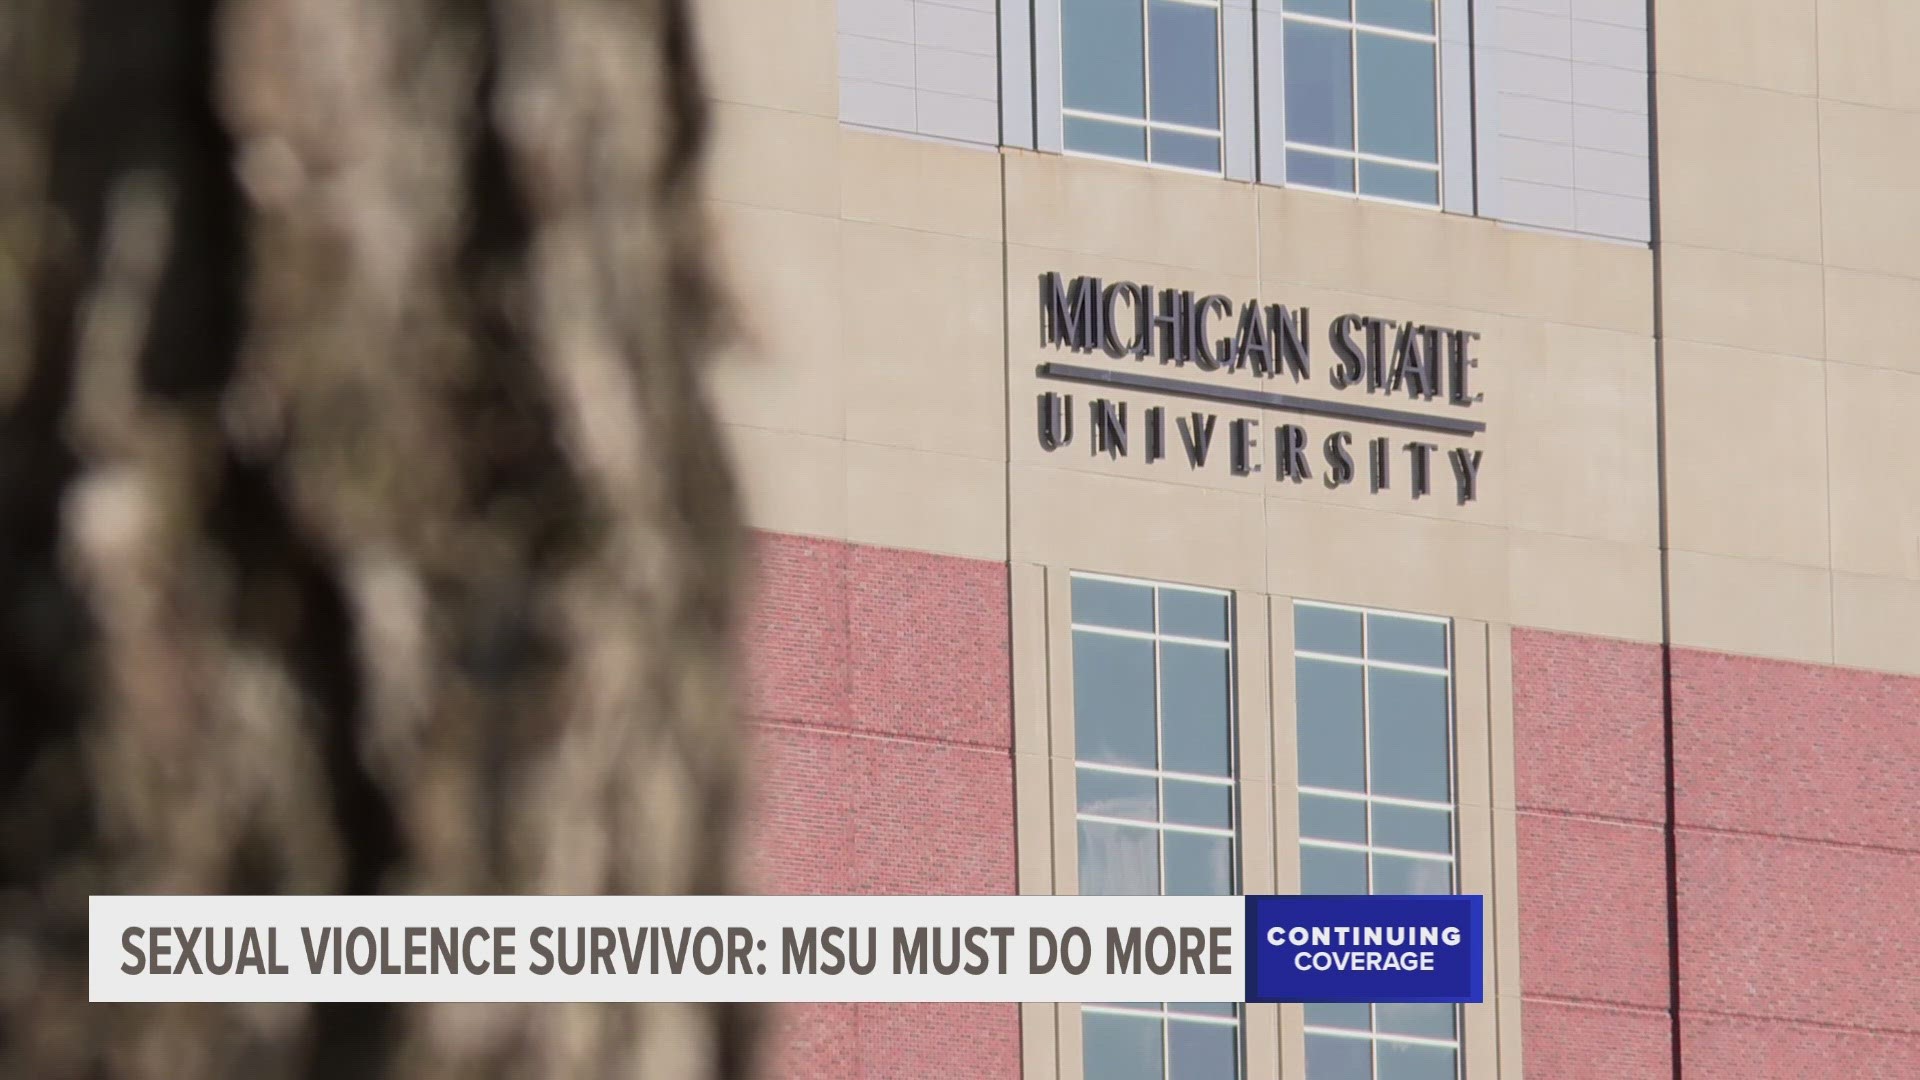 MSU football coach Mel Tucker was suspended from his position after news broke of the sexual harassment complaint filed by rape survivor and activist Brenda Tracy.